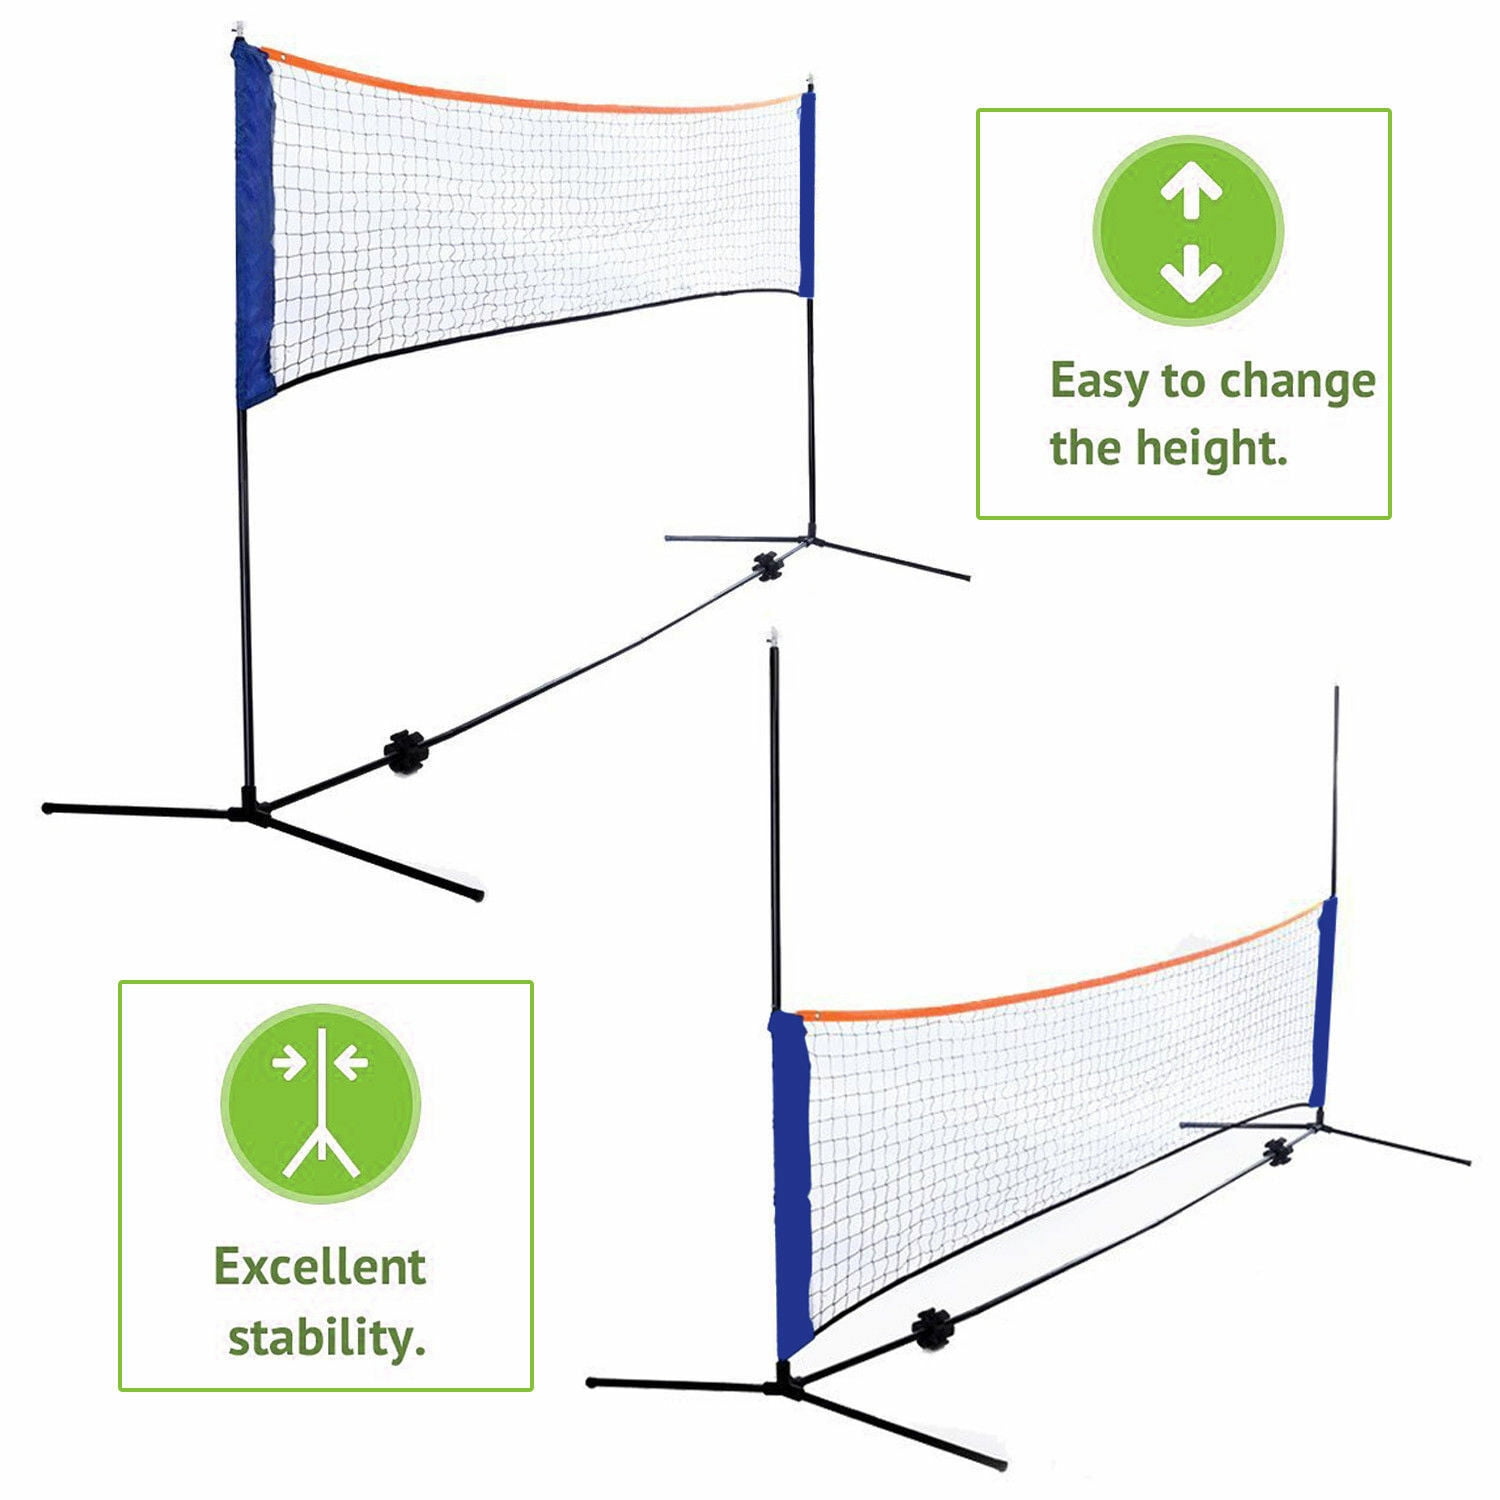 10 Feet Portable Badminton Volleyball Tennis Net Set with Stand/Frame Carry Bag 